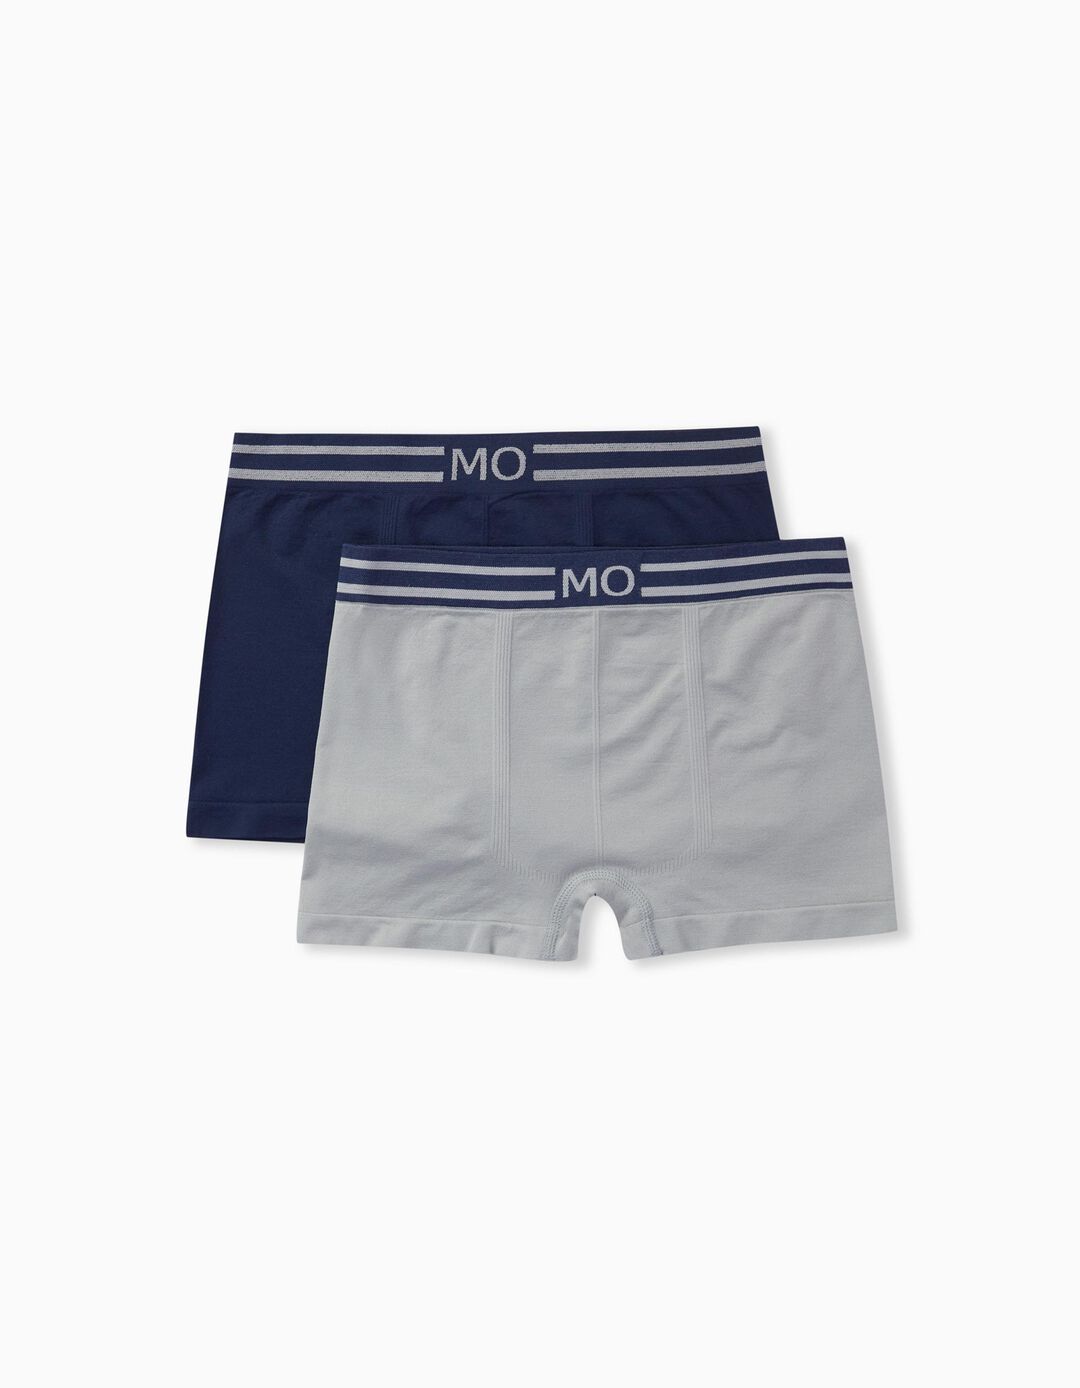 2 Seamless Boxers Pack, Boys, Multicolour